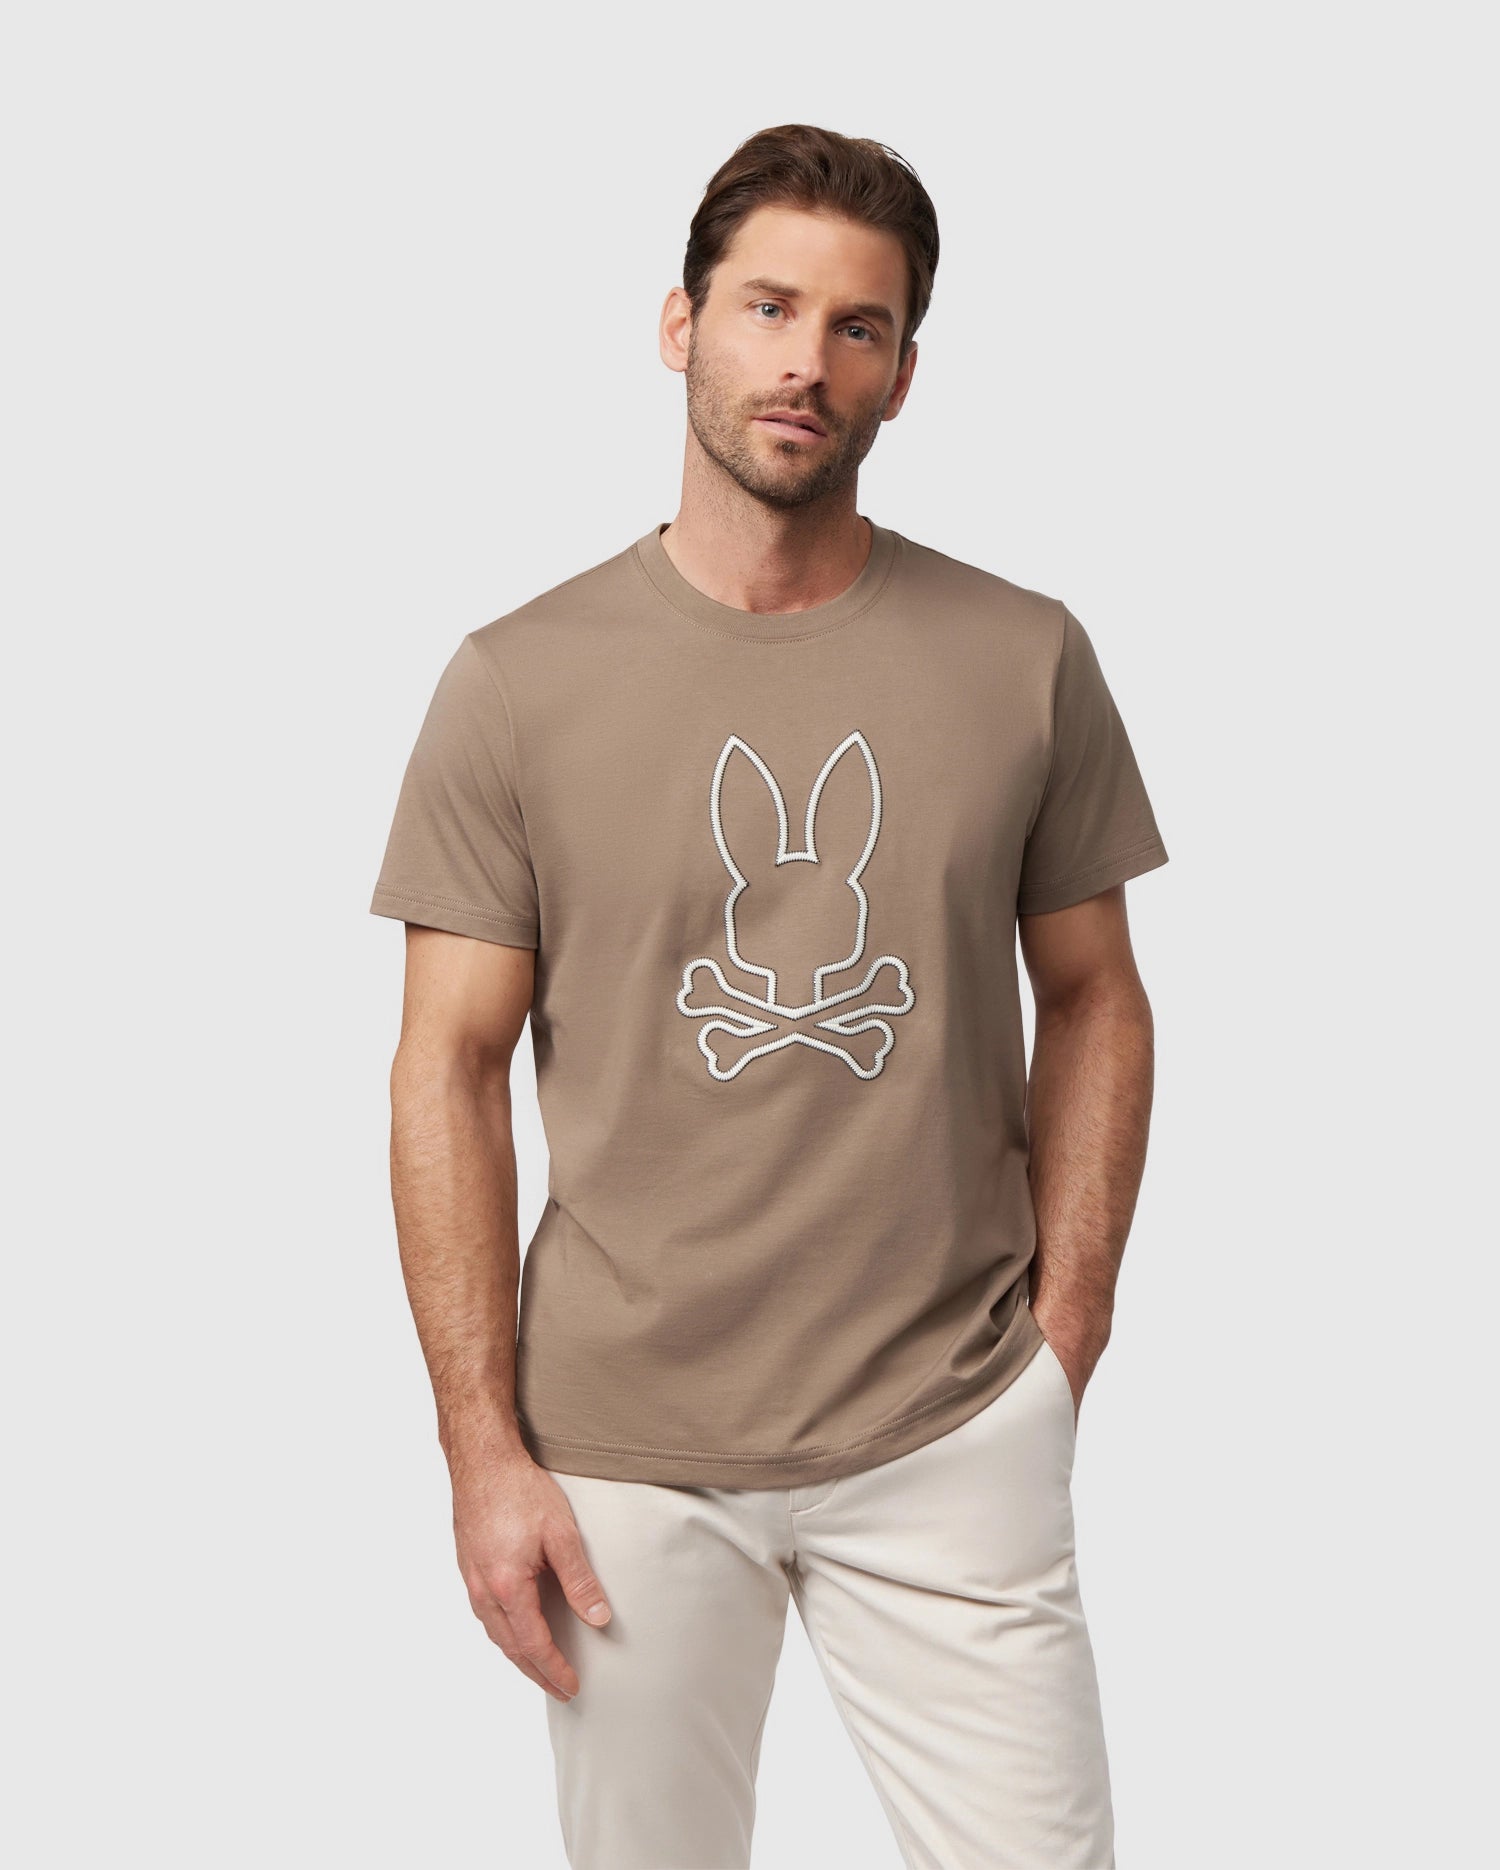 A man with a beard modeling a brown Psycho Bunny graphic tee (MENS FLOYD GRAPHIC TEE - B6U338B2TS) with an embroidered bunny skull and crossbones logo, paired with light khaki pants, standing against a plain background.